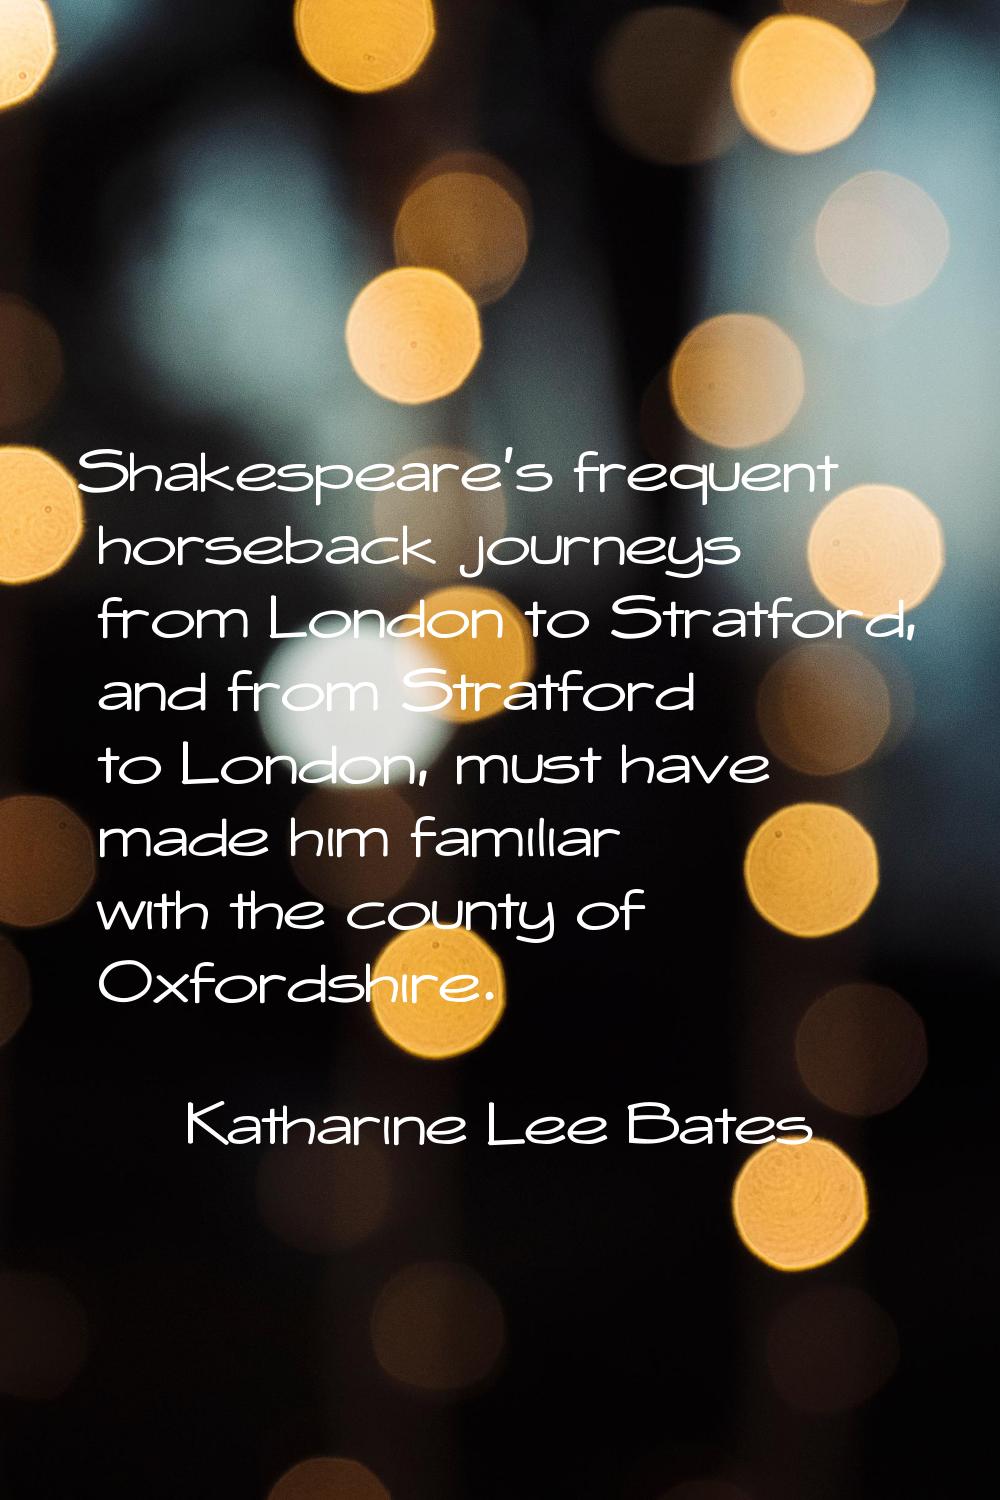 Shakespeare's frequent horseback journeys from London to Stratford, and from Stratford to London, m